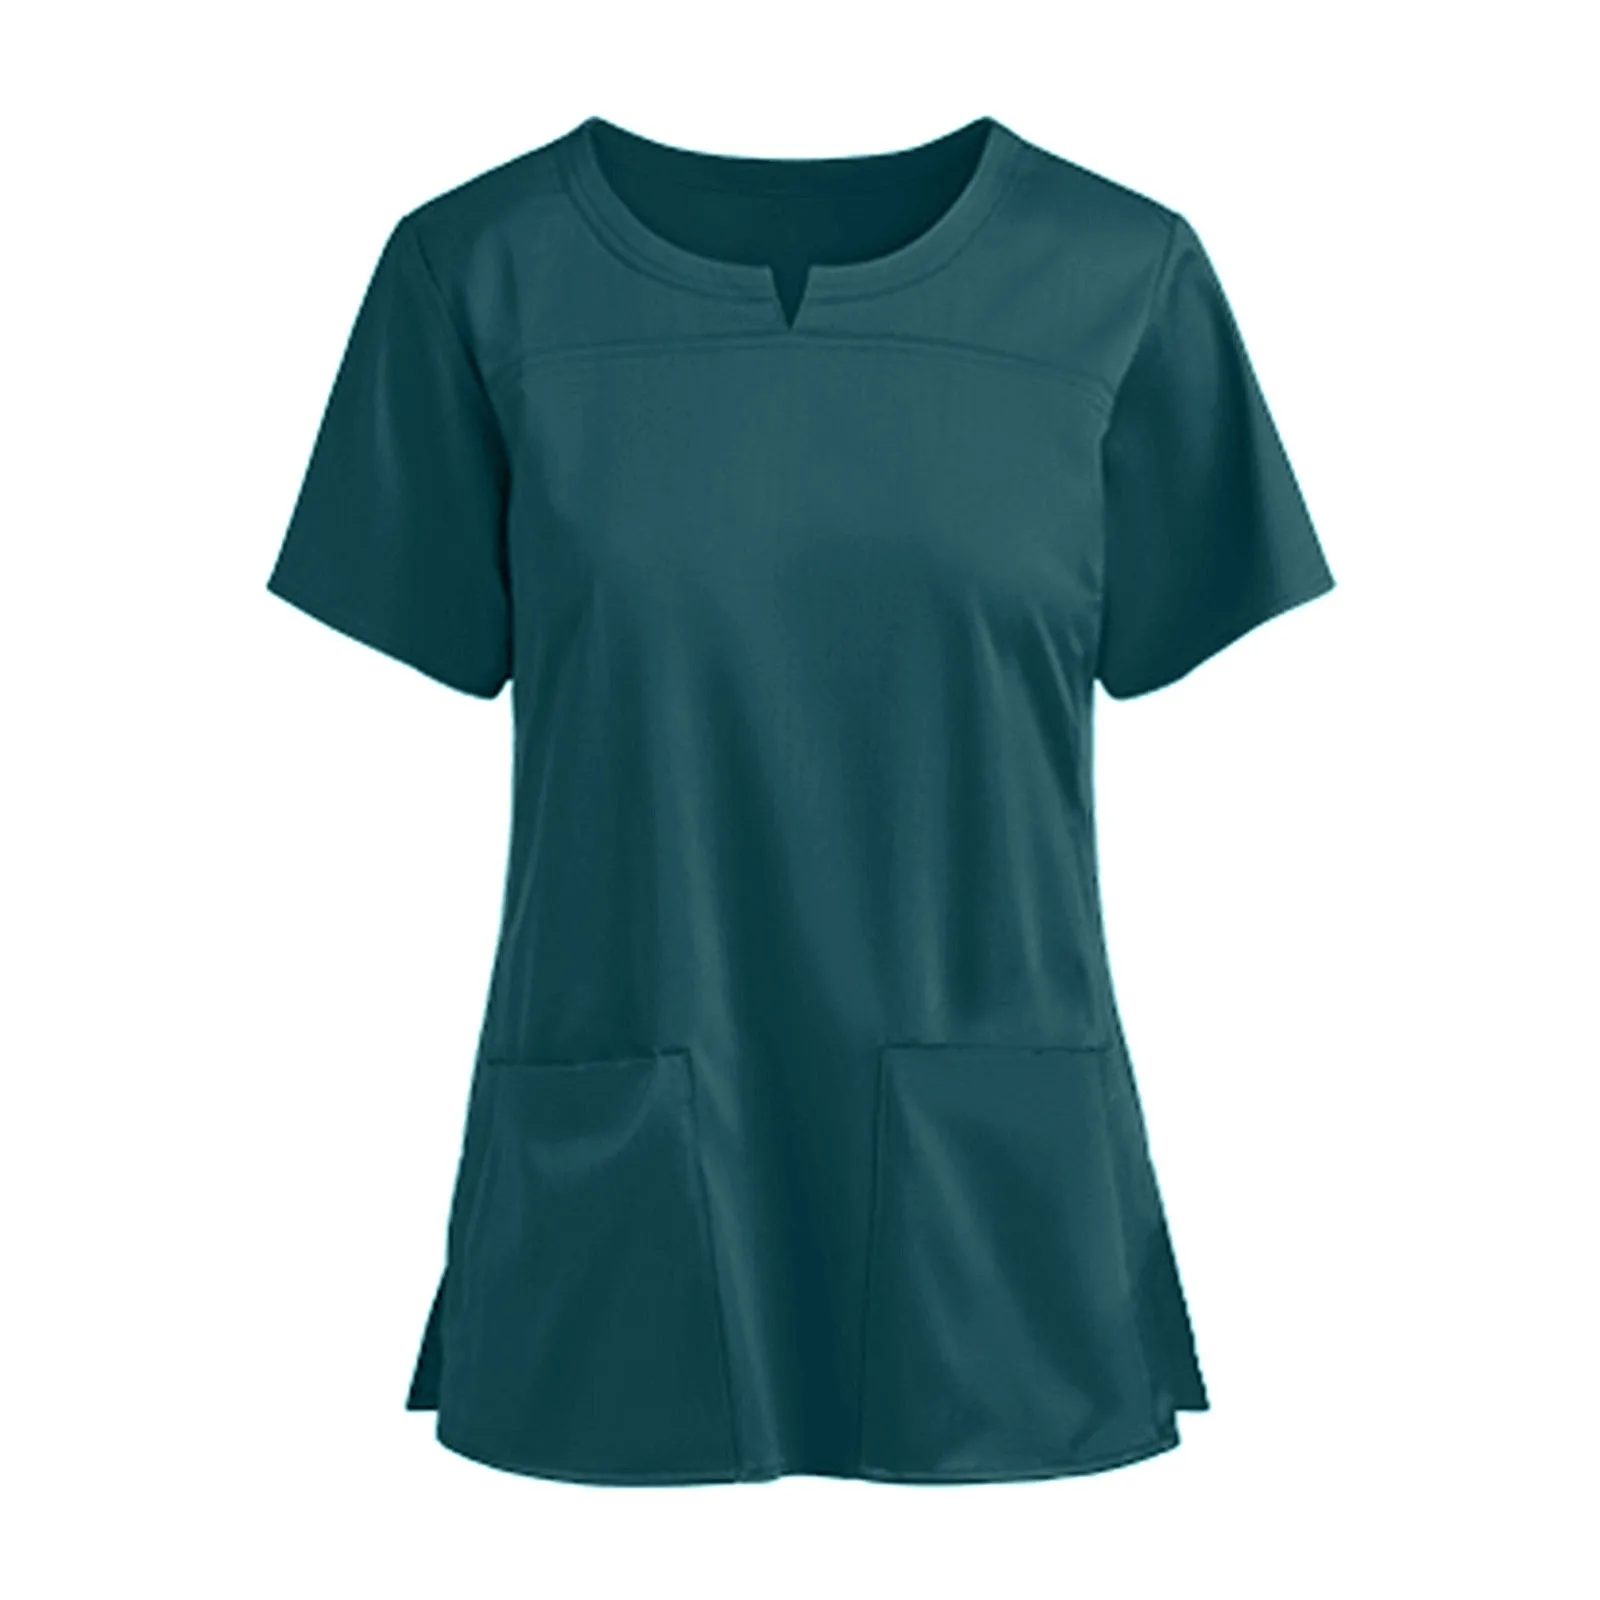 Nurse Uniform Women Solid Color Round Neck Short Sleeve Pockets Loose Blouse Scrubs Shirts Medical Healthcare Workers Uniform women short sleeve v neck nurse uniform hospital workers cat animal funny graphic t shirts scrub tops working uniform blouse